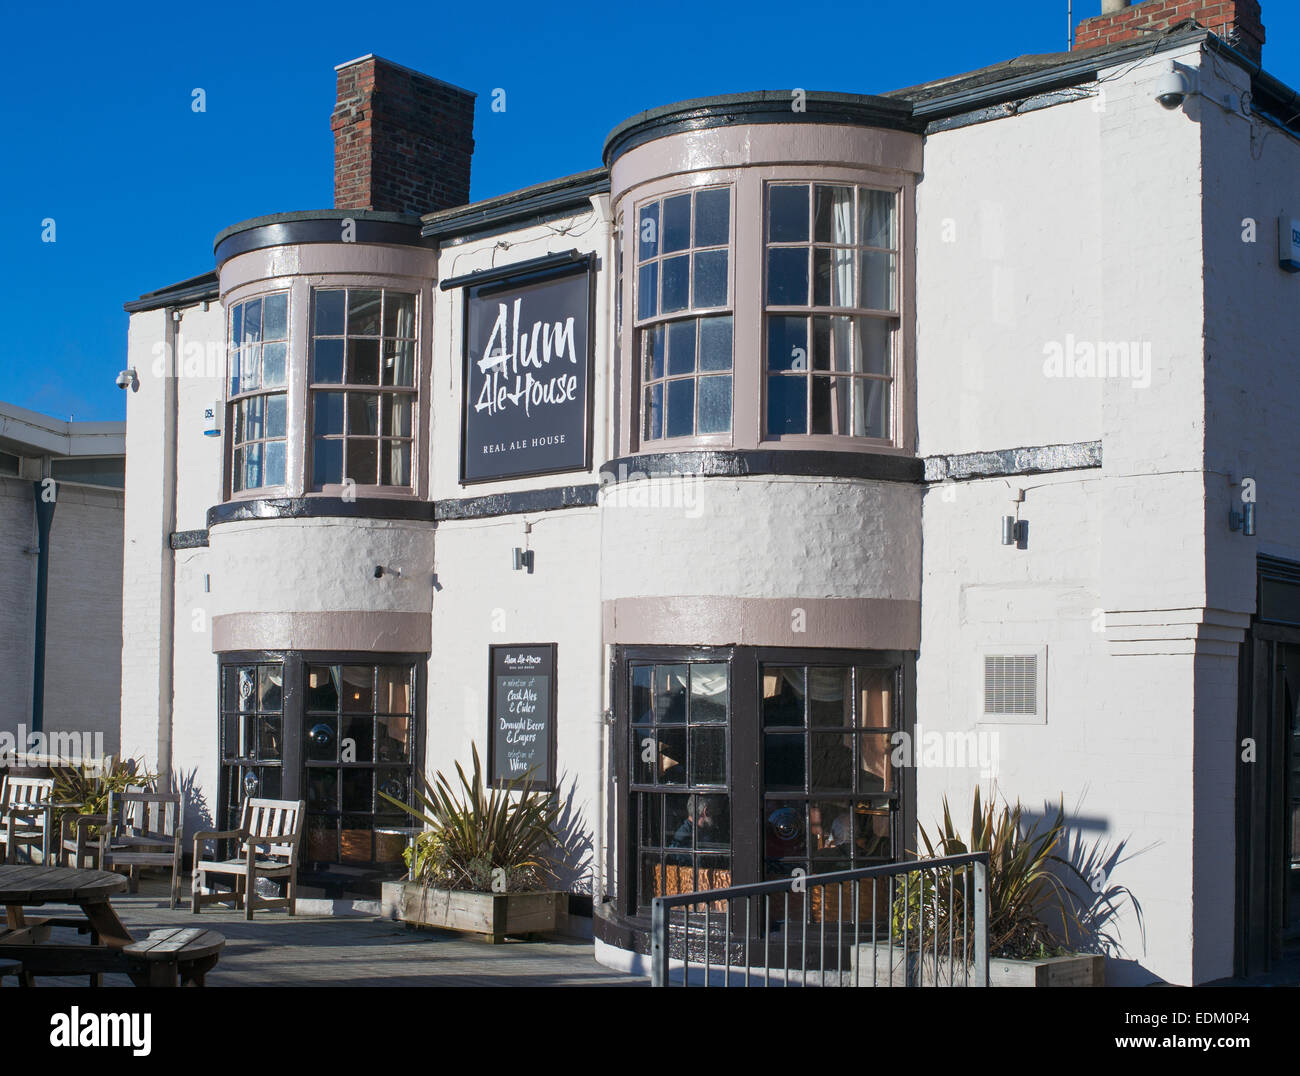 Das Alaun Ale House oder Pub in South Shields, Nord-Ost-England, UK Stockfoto